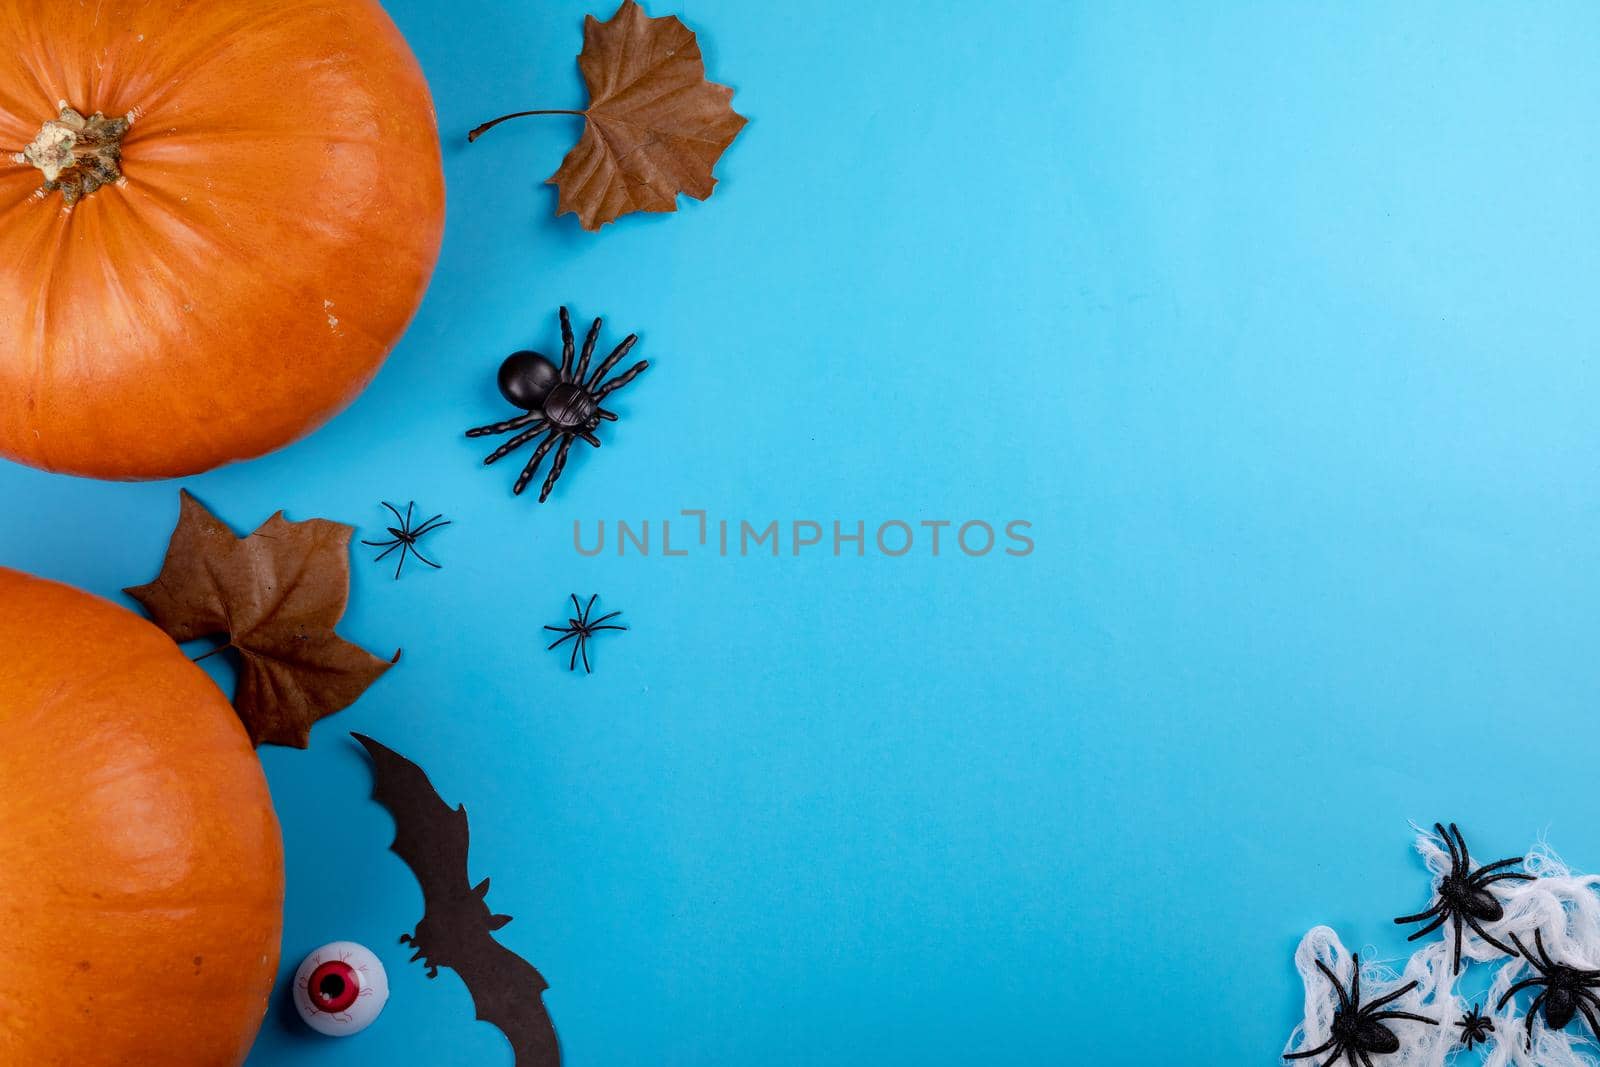 Composition of halloween decoration with pumpkin, bats, spiders and copy space on blue background. halloween tradition and celebration concept digitally generated image.